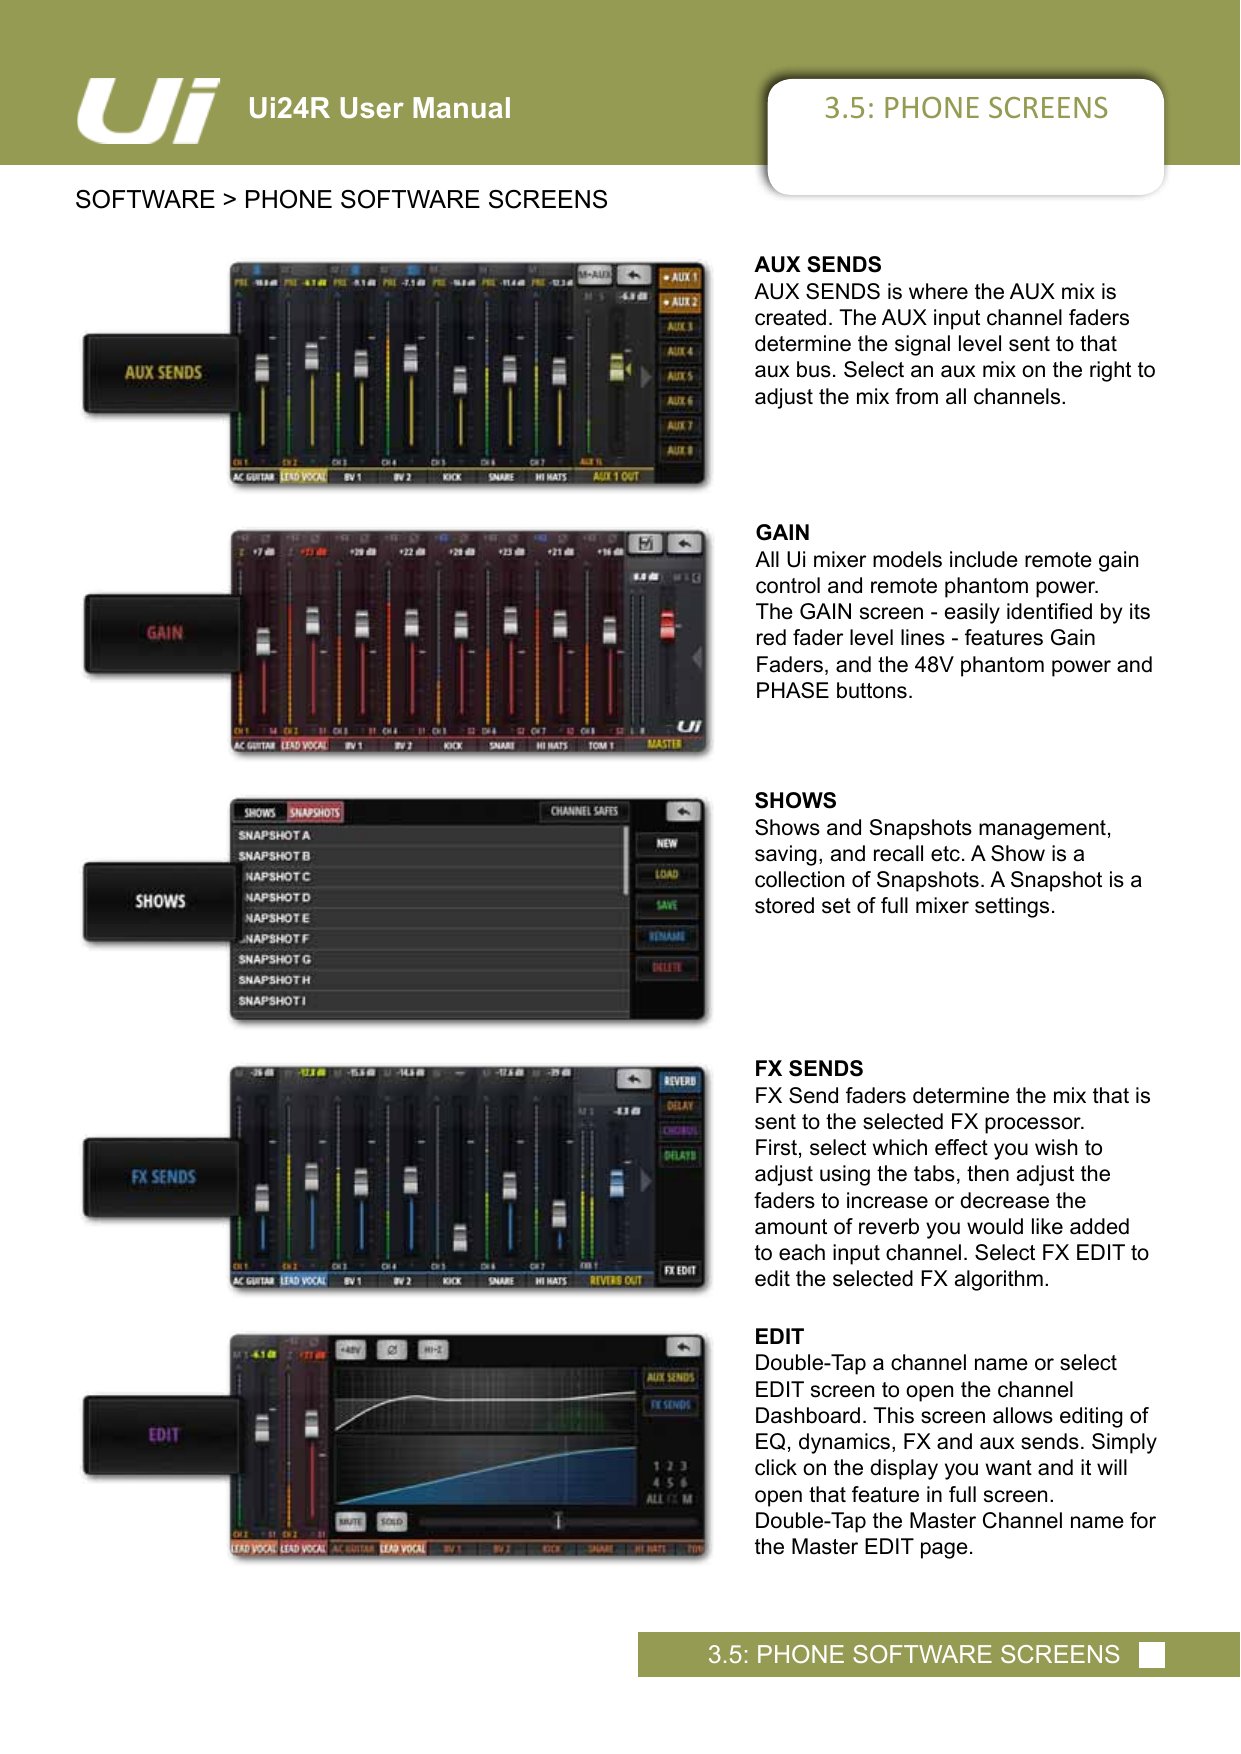 3.5: PHONE SCREENSSOFTWARE &gt; PHONE SOFTWARE SCREENS3.5: PHONE SOFTWARE SCREENSUi24R User ManualAUX SENDSAUX SENDS is where the AUX mix is created. The AUX input channel faders determine the signal level sent to that aux bus. Select an aux mix on the right to adjust the mix from all channels. GAINAll Ui mixer models include remote gain control and remote phantom power.  TheGAINscreen-easilyidentiedbyitsred fader level lines - features Gain  Faders, and the 48V phantom power and PHASE buttons.SHOWSShows and Snapshots management,  saving, and recall etc. A Show is a  collection of Snapshots. A Snapshot is a stored set of full mixer settings.FX SENDSFX Send faders determine the mix that is sent to the selected FX processor.  First, select which effect you wish to  adjust using the tabs, then adjust the  faders to increase or decrease the amount of reverb you would like added to each input channel. Select FX EDIT to edit the selected FX algorithm.EDITDouble-Tap a channel name or select EDIT screen to open the channel  Dashboard. This screen allows editing of EQ, dynamics, FX and aux sends. Simply click on the display you want and it will open that feature in full screen.Double-Tap the Master Channel name for the Master EDIT page.